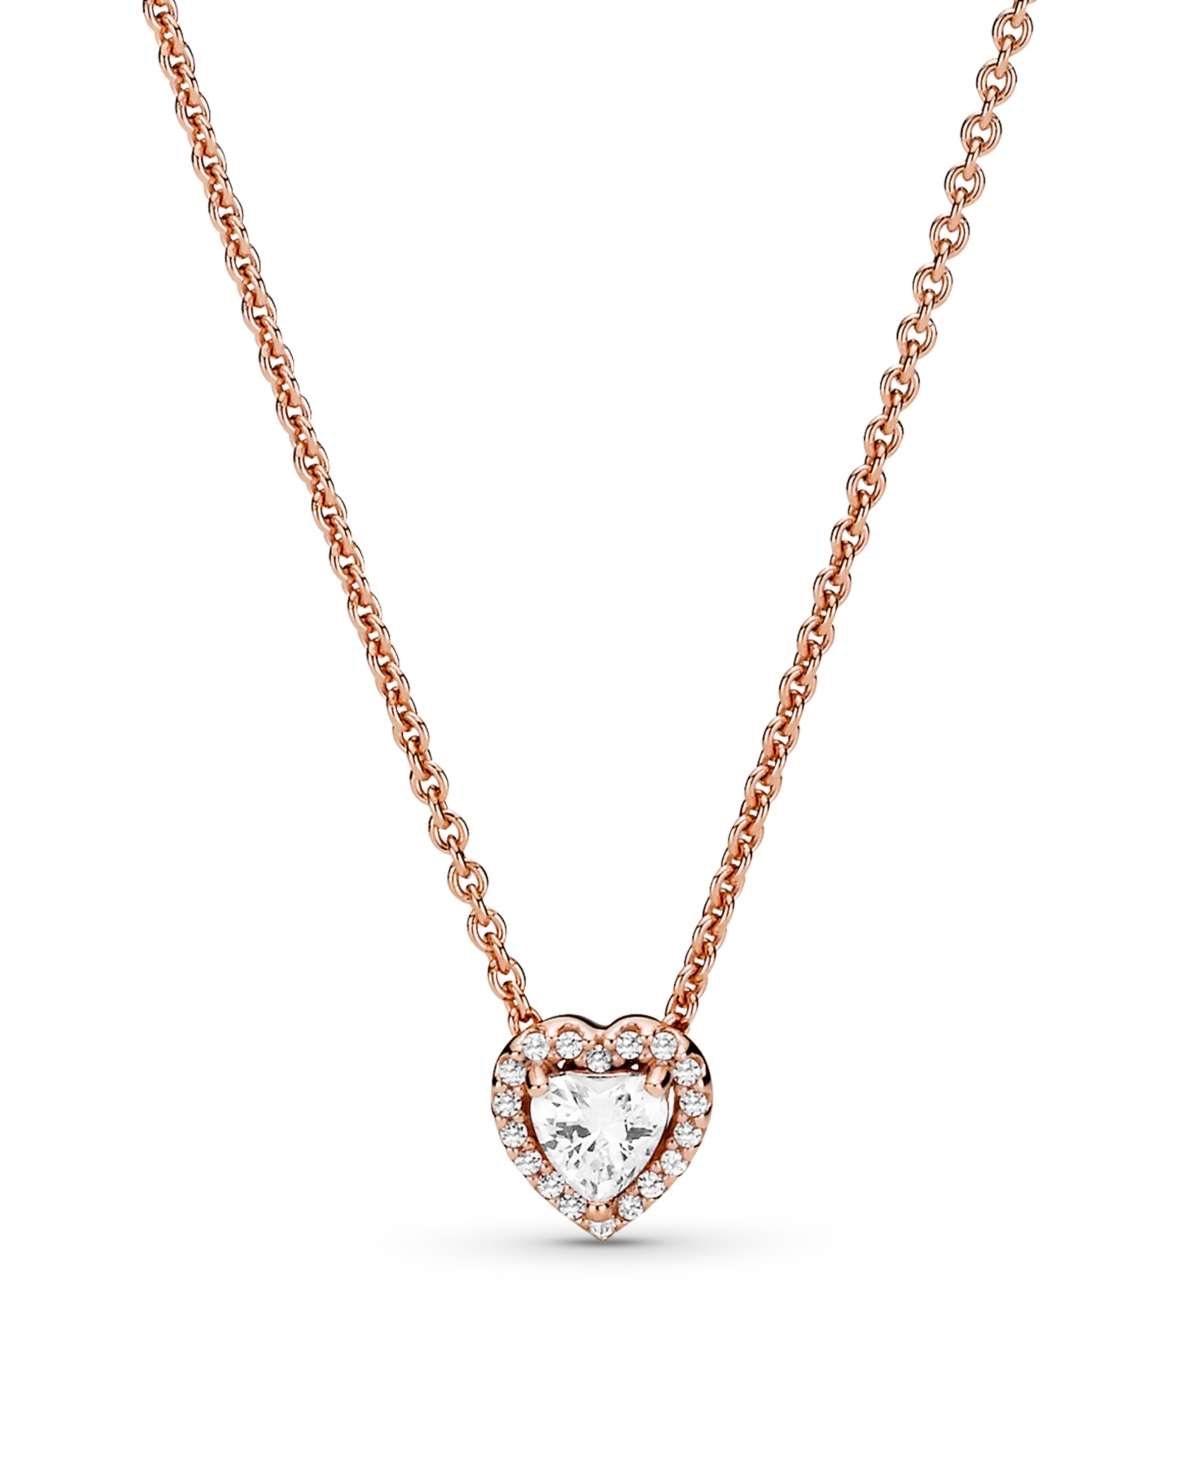 Pandora Timeless 14k Rose Gold-plated Sparkling Cubic Zirconia Heart Collier Necklace